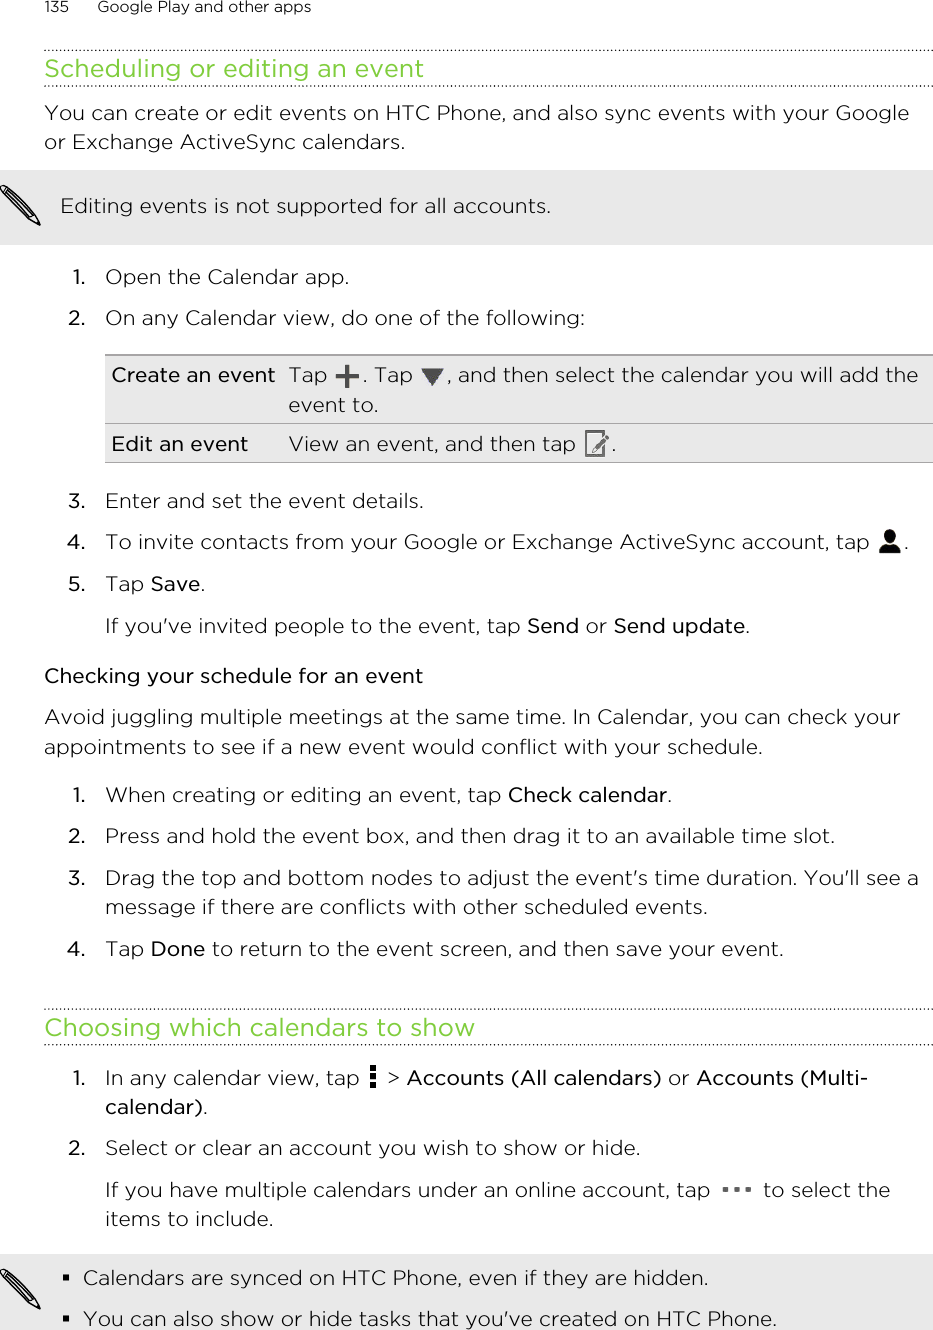 Scheduling or editing an eventYou can create or edit events on HTC Phone, and also sync events with your Googleor Exchange ActiveSync calendars.Editing events is not supported for all accounts.1. Open the Calendar app.2. On any Calendar view, do one of the following:Create an event Tap  . Tap  , and then select the calendar you will add theevent to.Edit an event View an event, and then tap  .3. Enter and set the event details.4. To invite contacts from your Google or Exchange ActiveSync account, tap  .5. Tap Save. If you&apos;ve invited people to the event, tap Send or Send update.Checking your schedule for an eventAvoid juggling multiple meetings at the same time. In Calendar, you can check yourappointments to see if a new event would conflict with your schedule.1. When creating or editing an event, tap Check calendar.2. Press and hold the event box, and then drag it to an available time slot.3. Drag the top and bottom nodes to adjust the event&apos;s time duration. You&apos;ll see amessage if there are conflicts with other scheduled events.4. Tap Done to return to the event screen, and then save your event.Choosing which calendars to show1. In any calendar view, tap   &gt; Accounts (All calendars) or Accounts (Multi-calendar).2. Select or clear an account you wish to show or hide. If you have multiple calendars under an online account, tap   to select theitems to include.§Calendars are synced on HTC Phone, even if they are hidden.§You can also show or hide tasks that you&apos;ve created on HTC Phone.135 Google Play and other apps